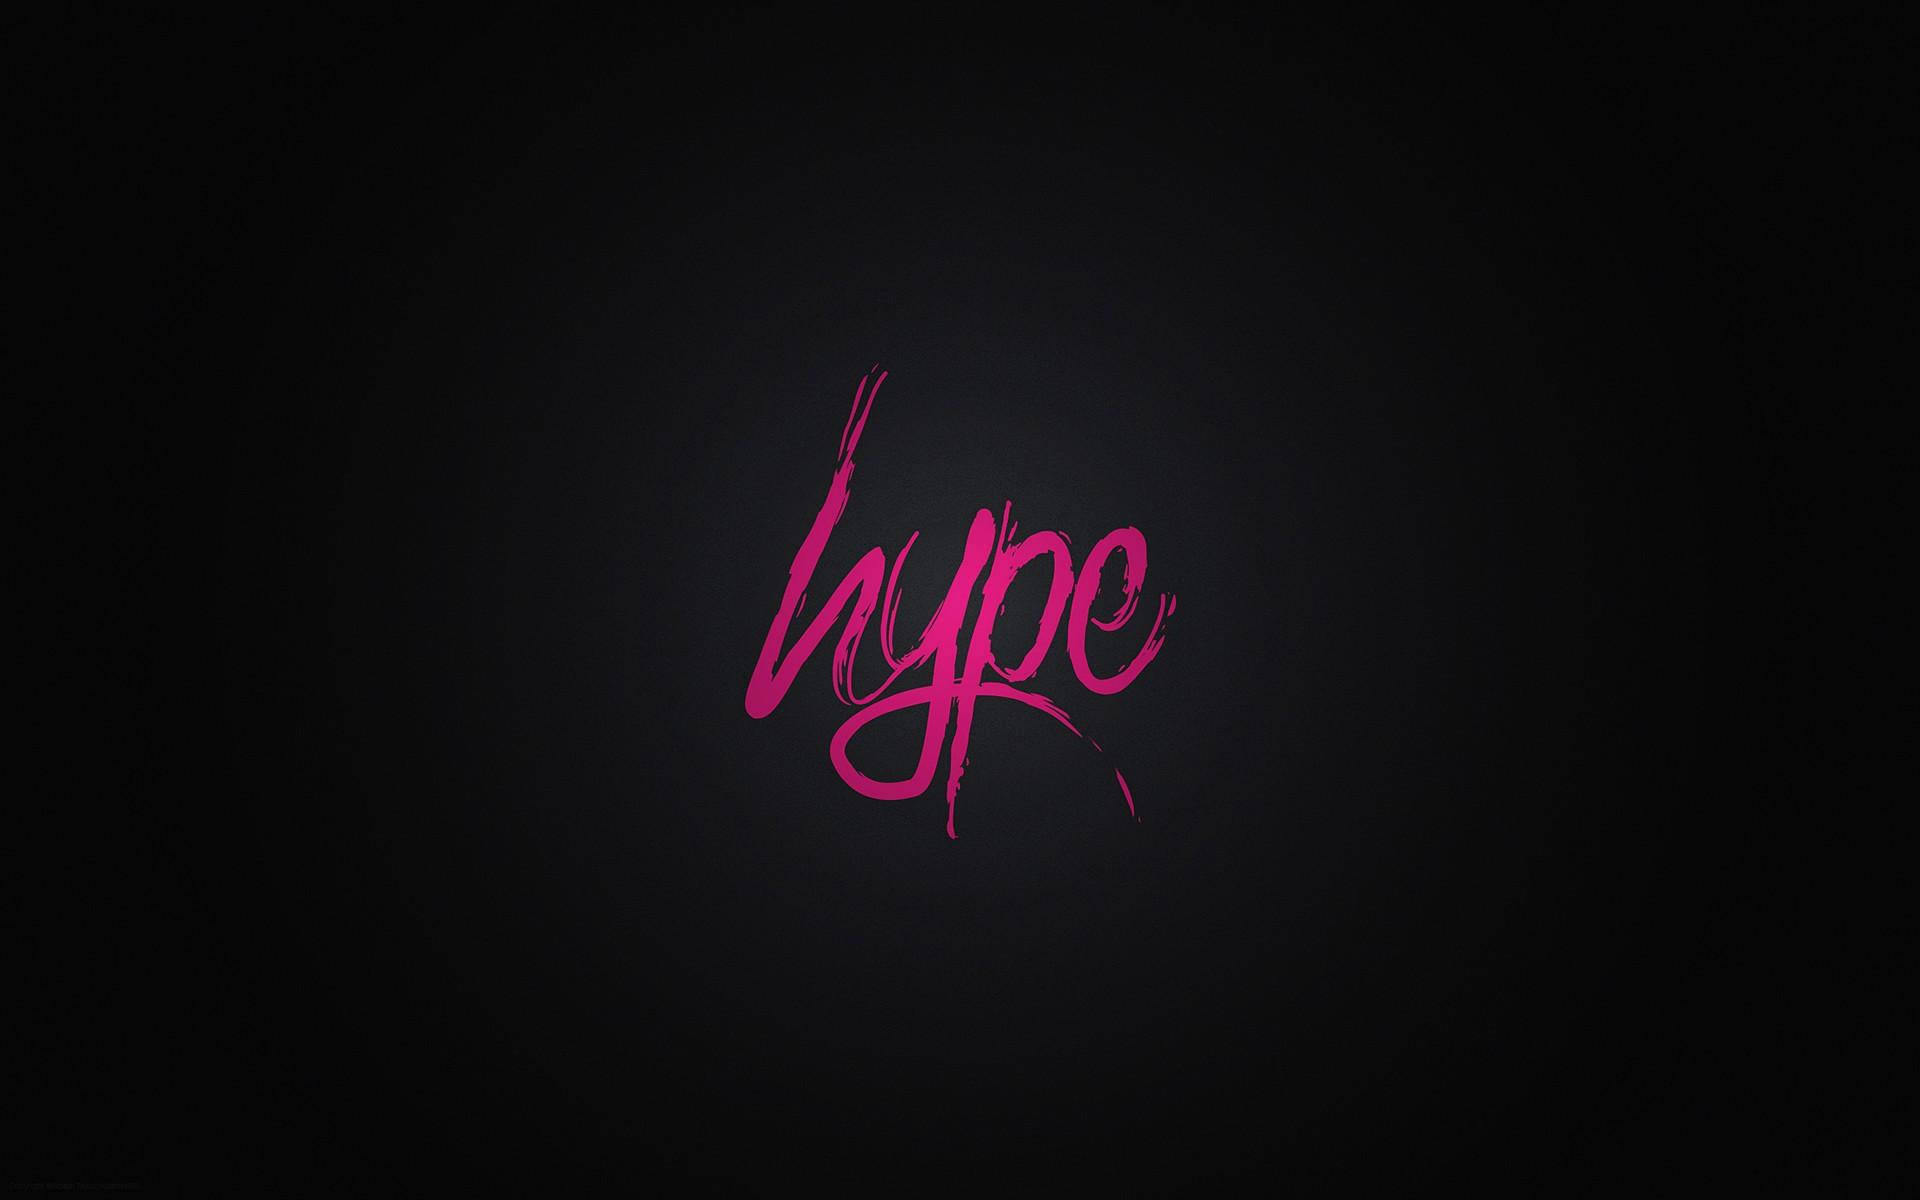 Black And Pink Aesthetic Hype Typography